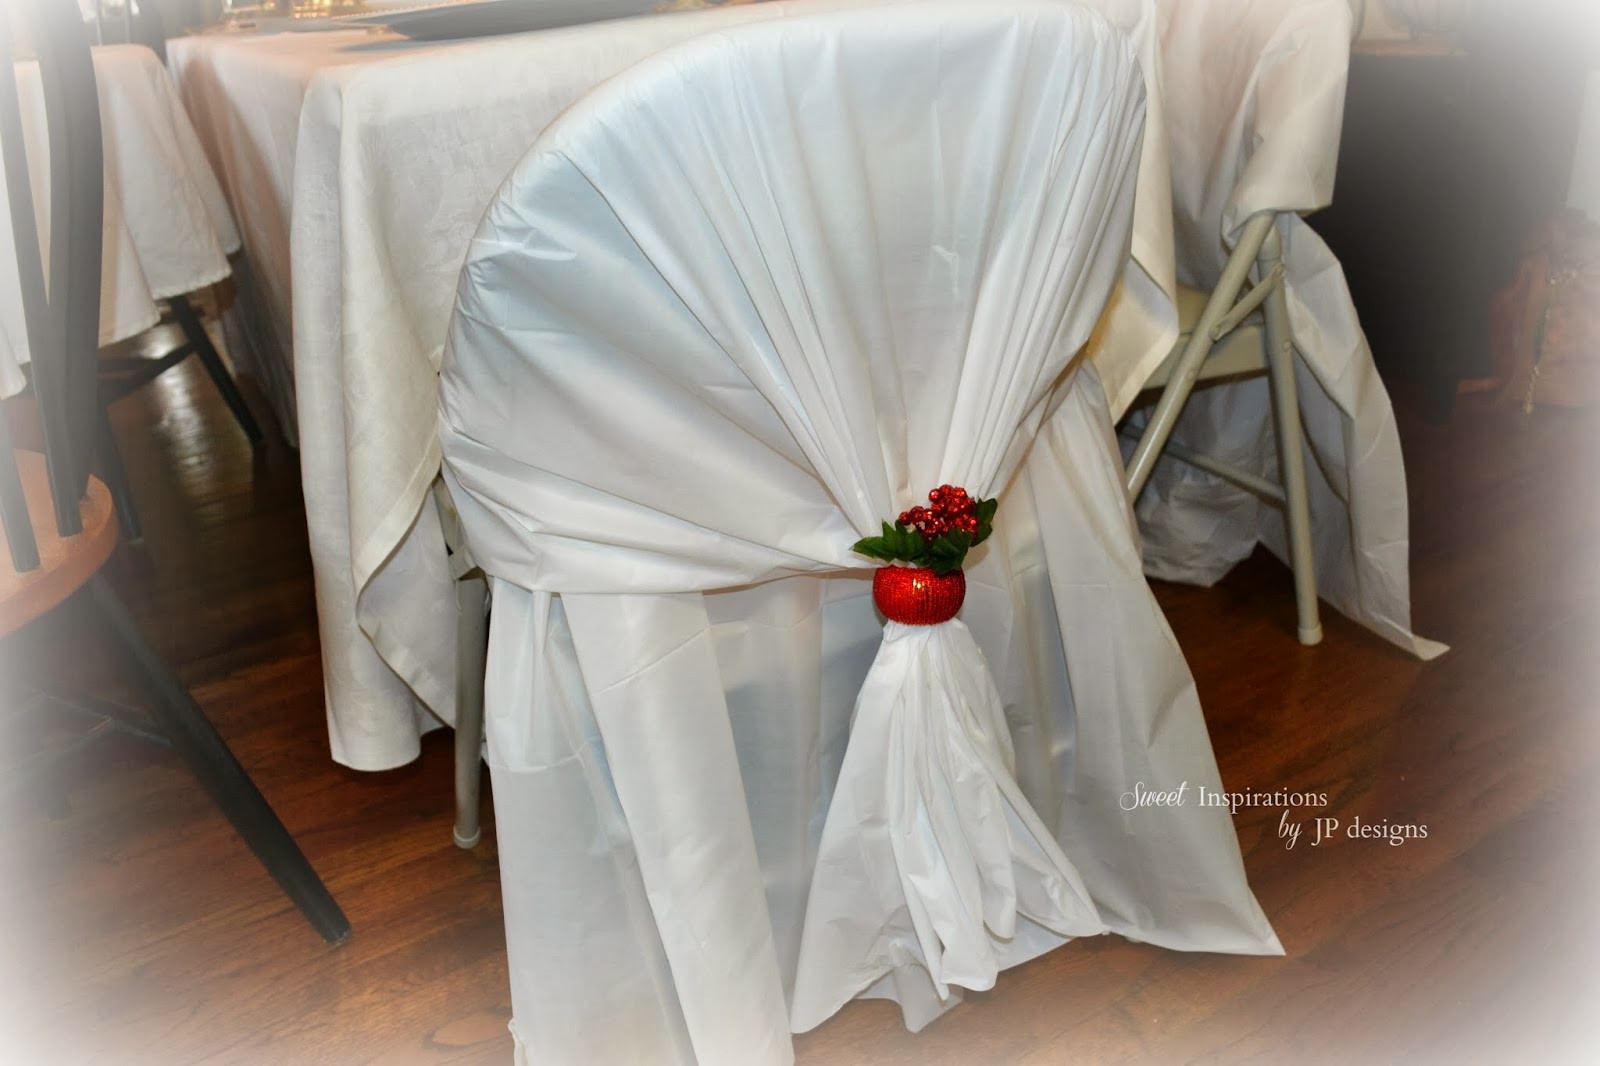 Best ideas about DIY Folding Chair Cover
. Save or Pin Sweet Inspirations by JP designs December 2013 Now.